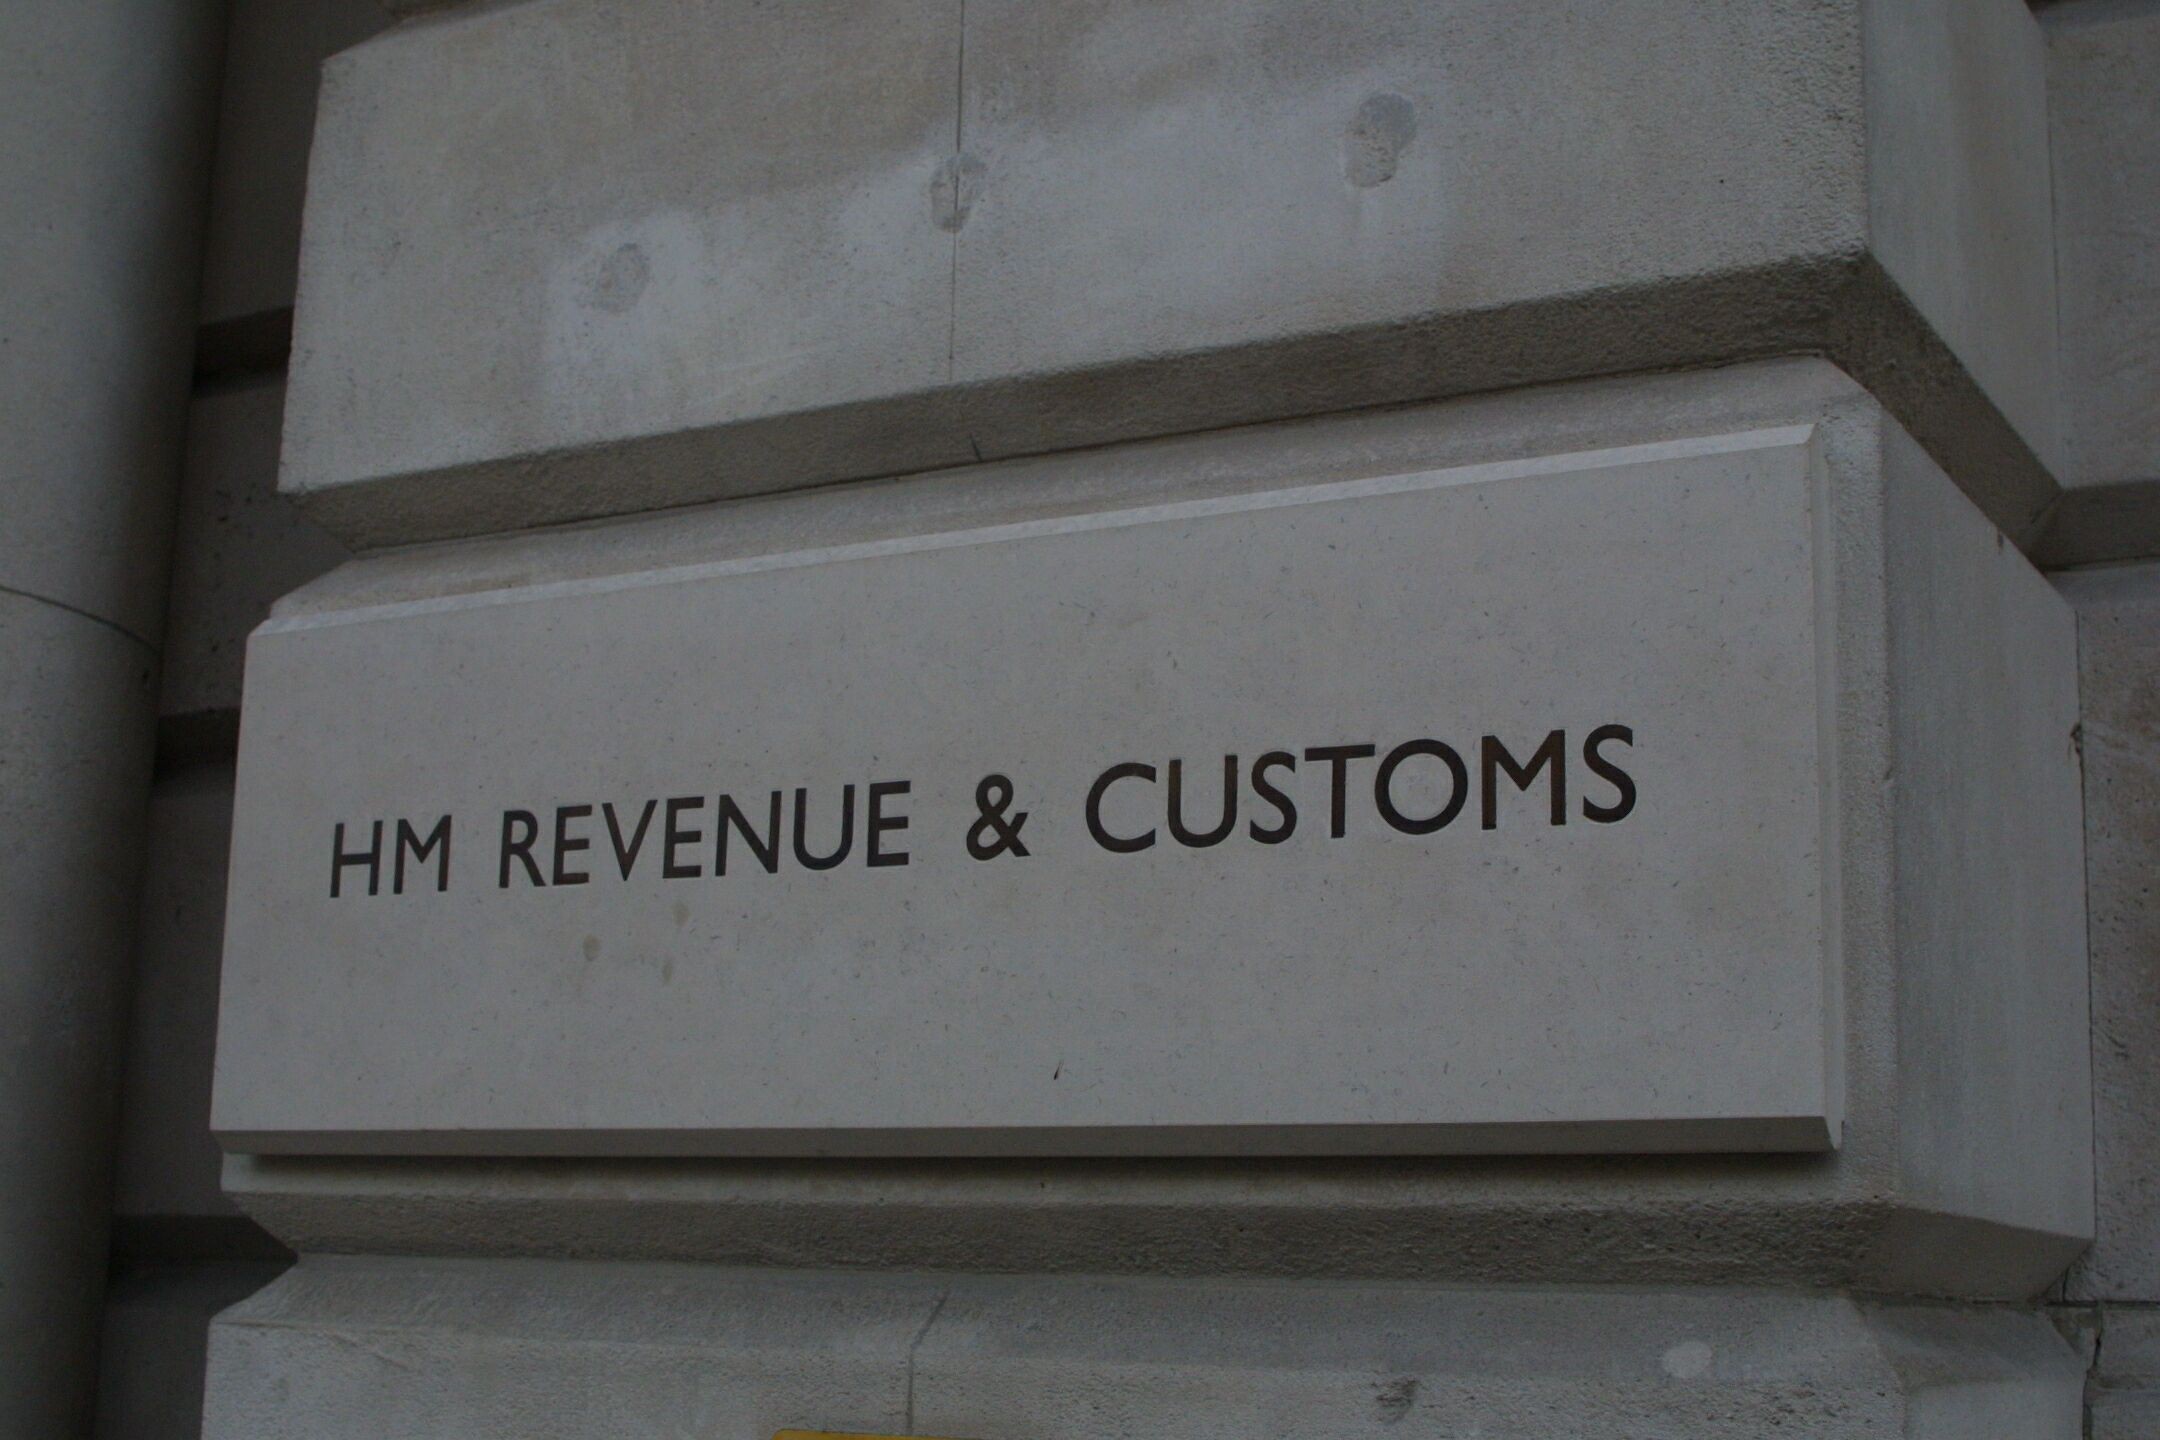 HMRC issues £3.2 million in Money Laundering penalties